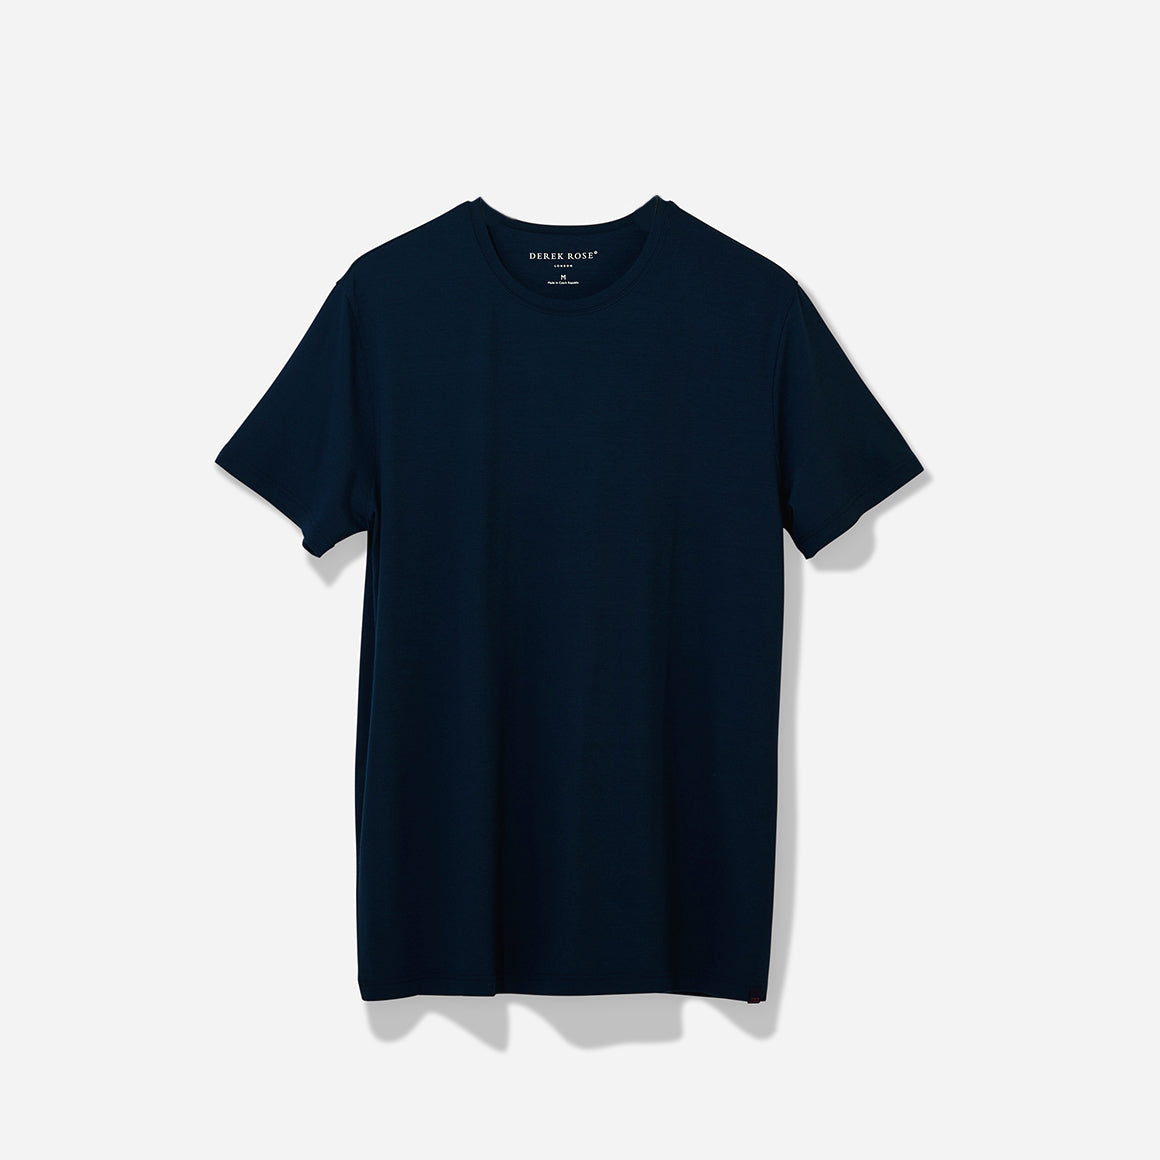 Derek Rose's Basel Micro Modal Crew Neck T-Shirt in a navy colorway. Shown against light grey background.